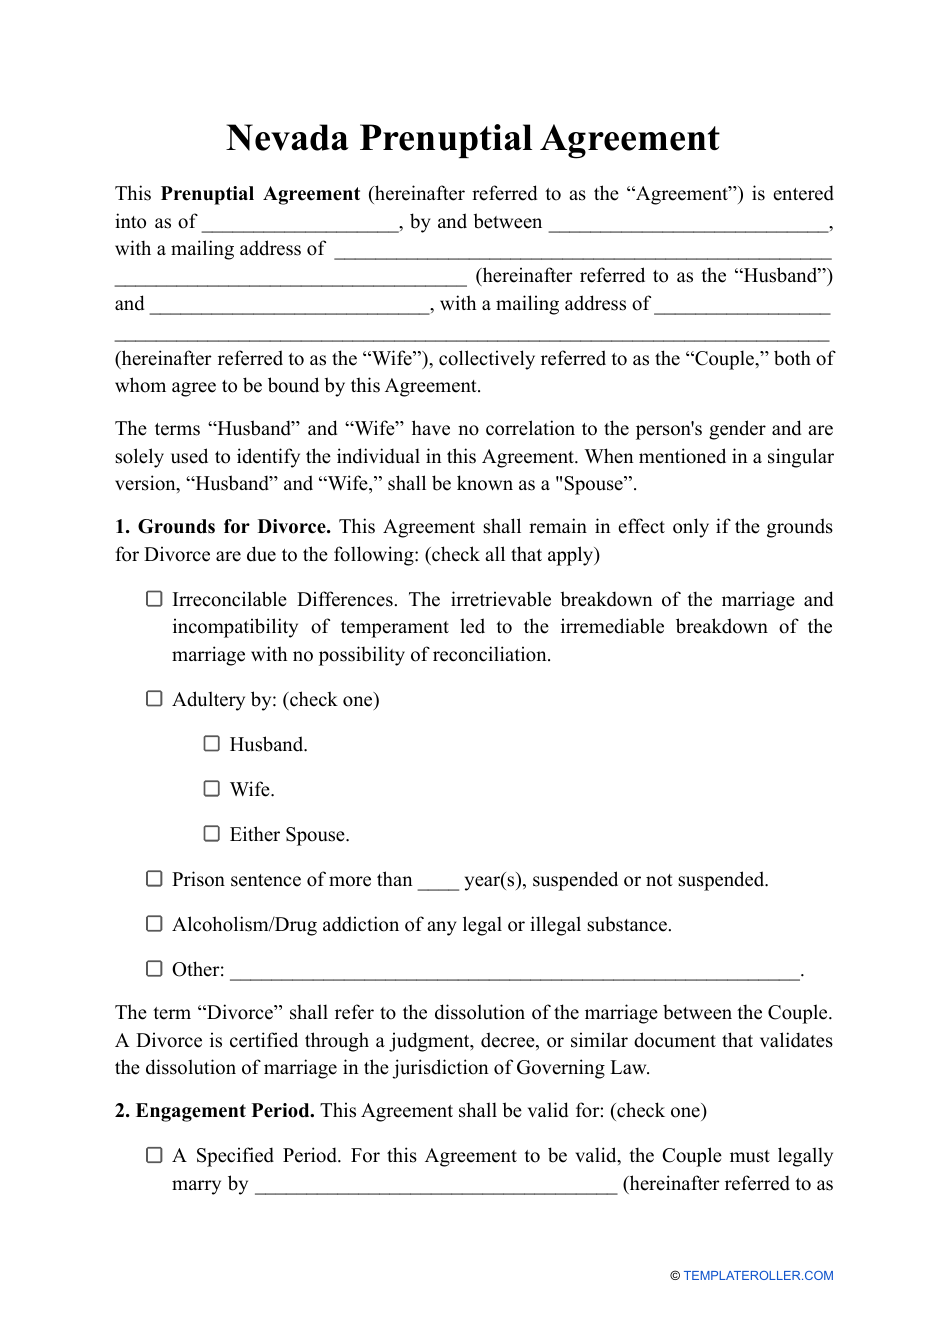 Nevada Prenuptial Agreement Template Fill Out, Sign Online and